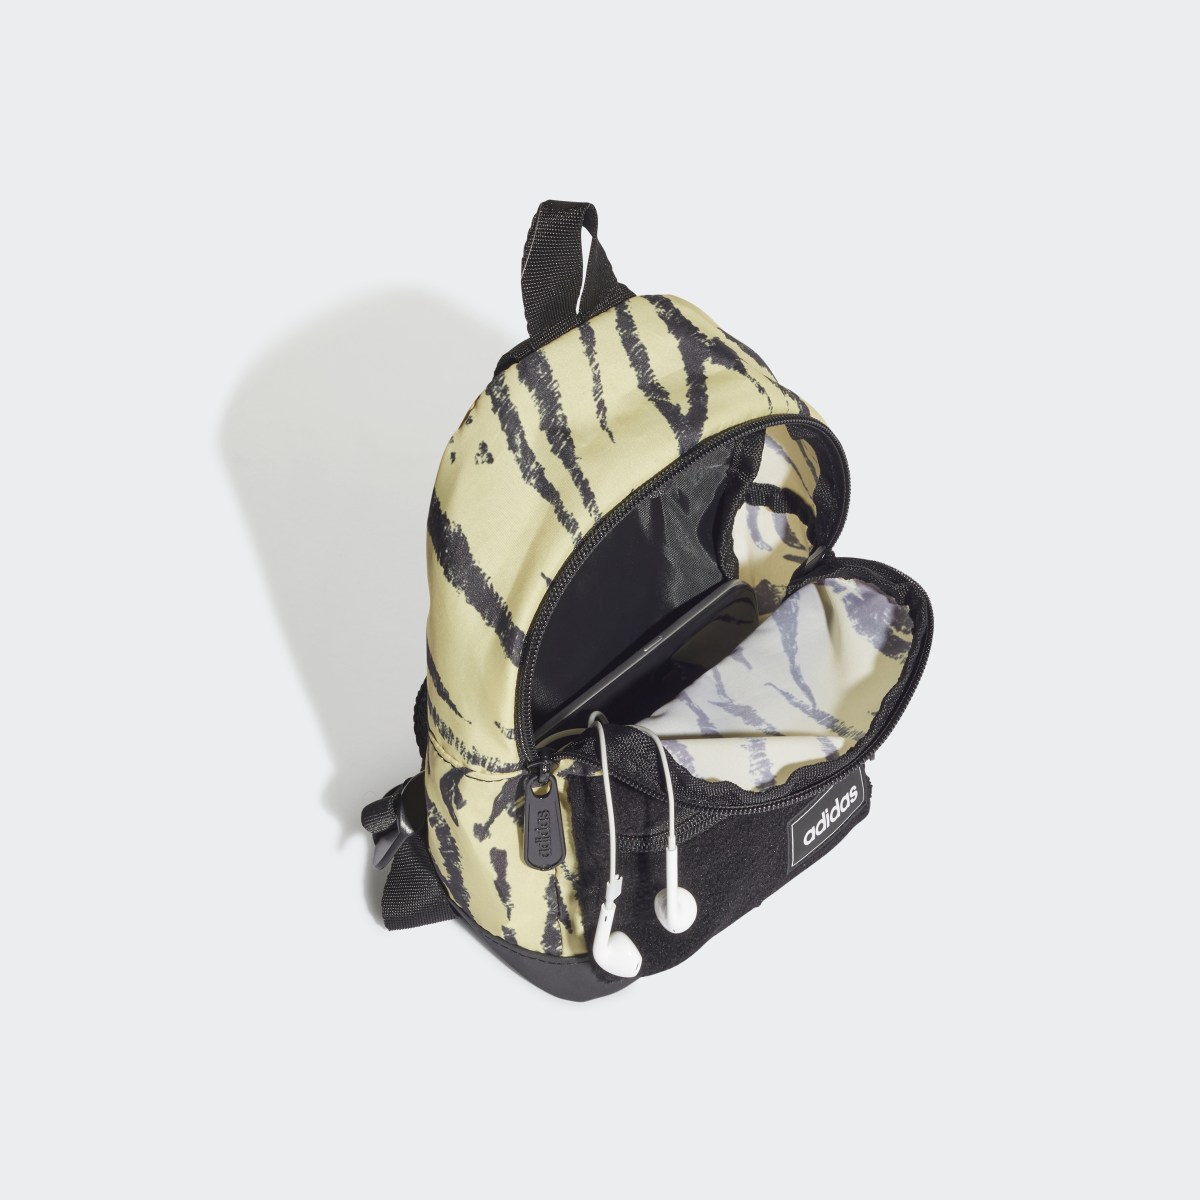 Adidas Tailored for Her Sport to Street Training Mini Backpack. 5